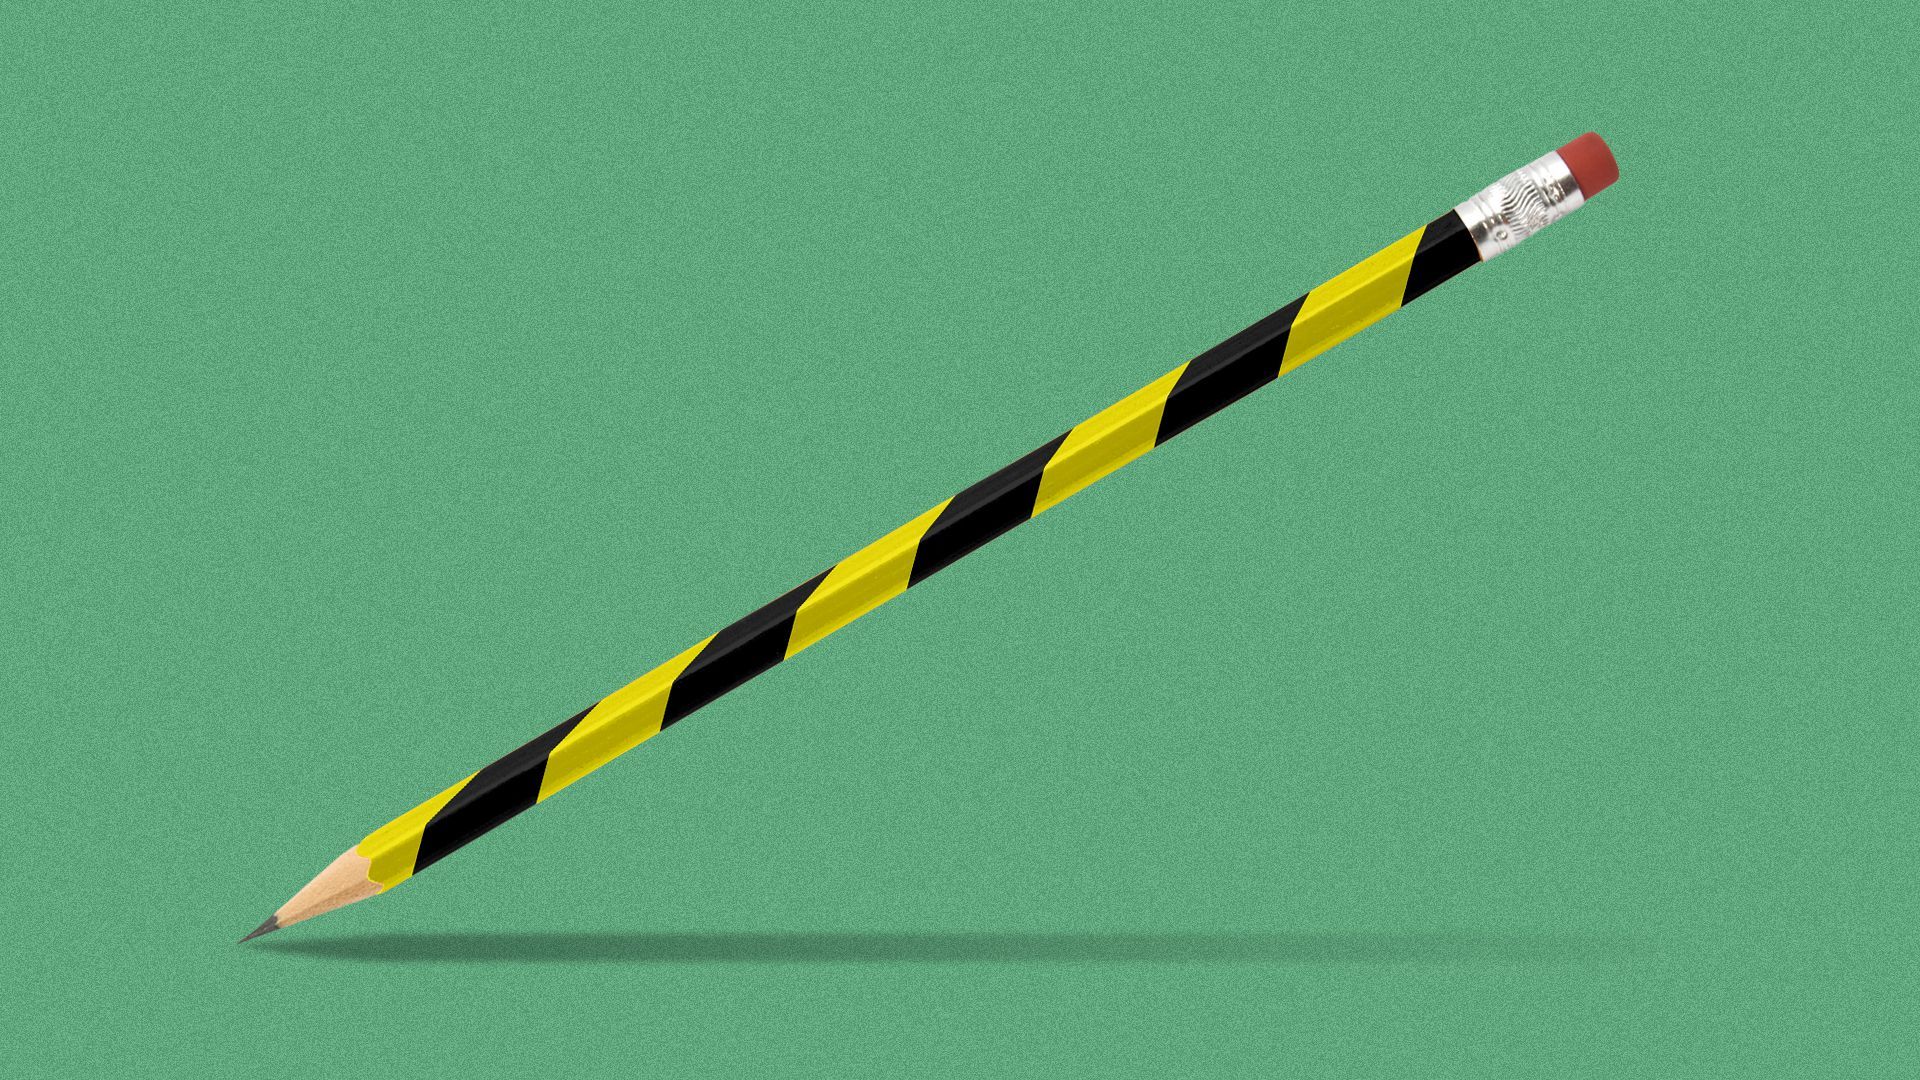 Illustration of a pencil with security-style yellow and black stripes.